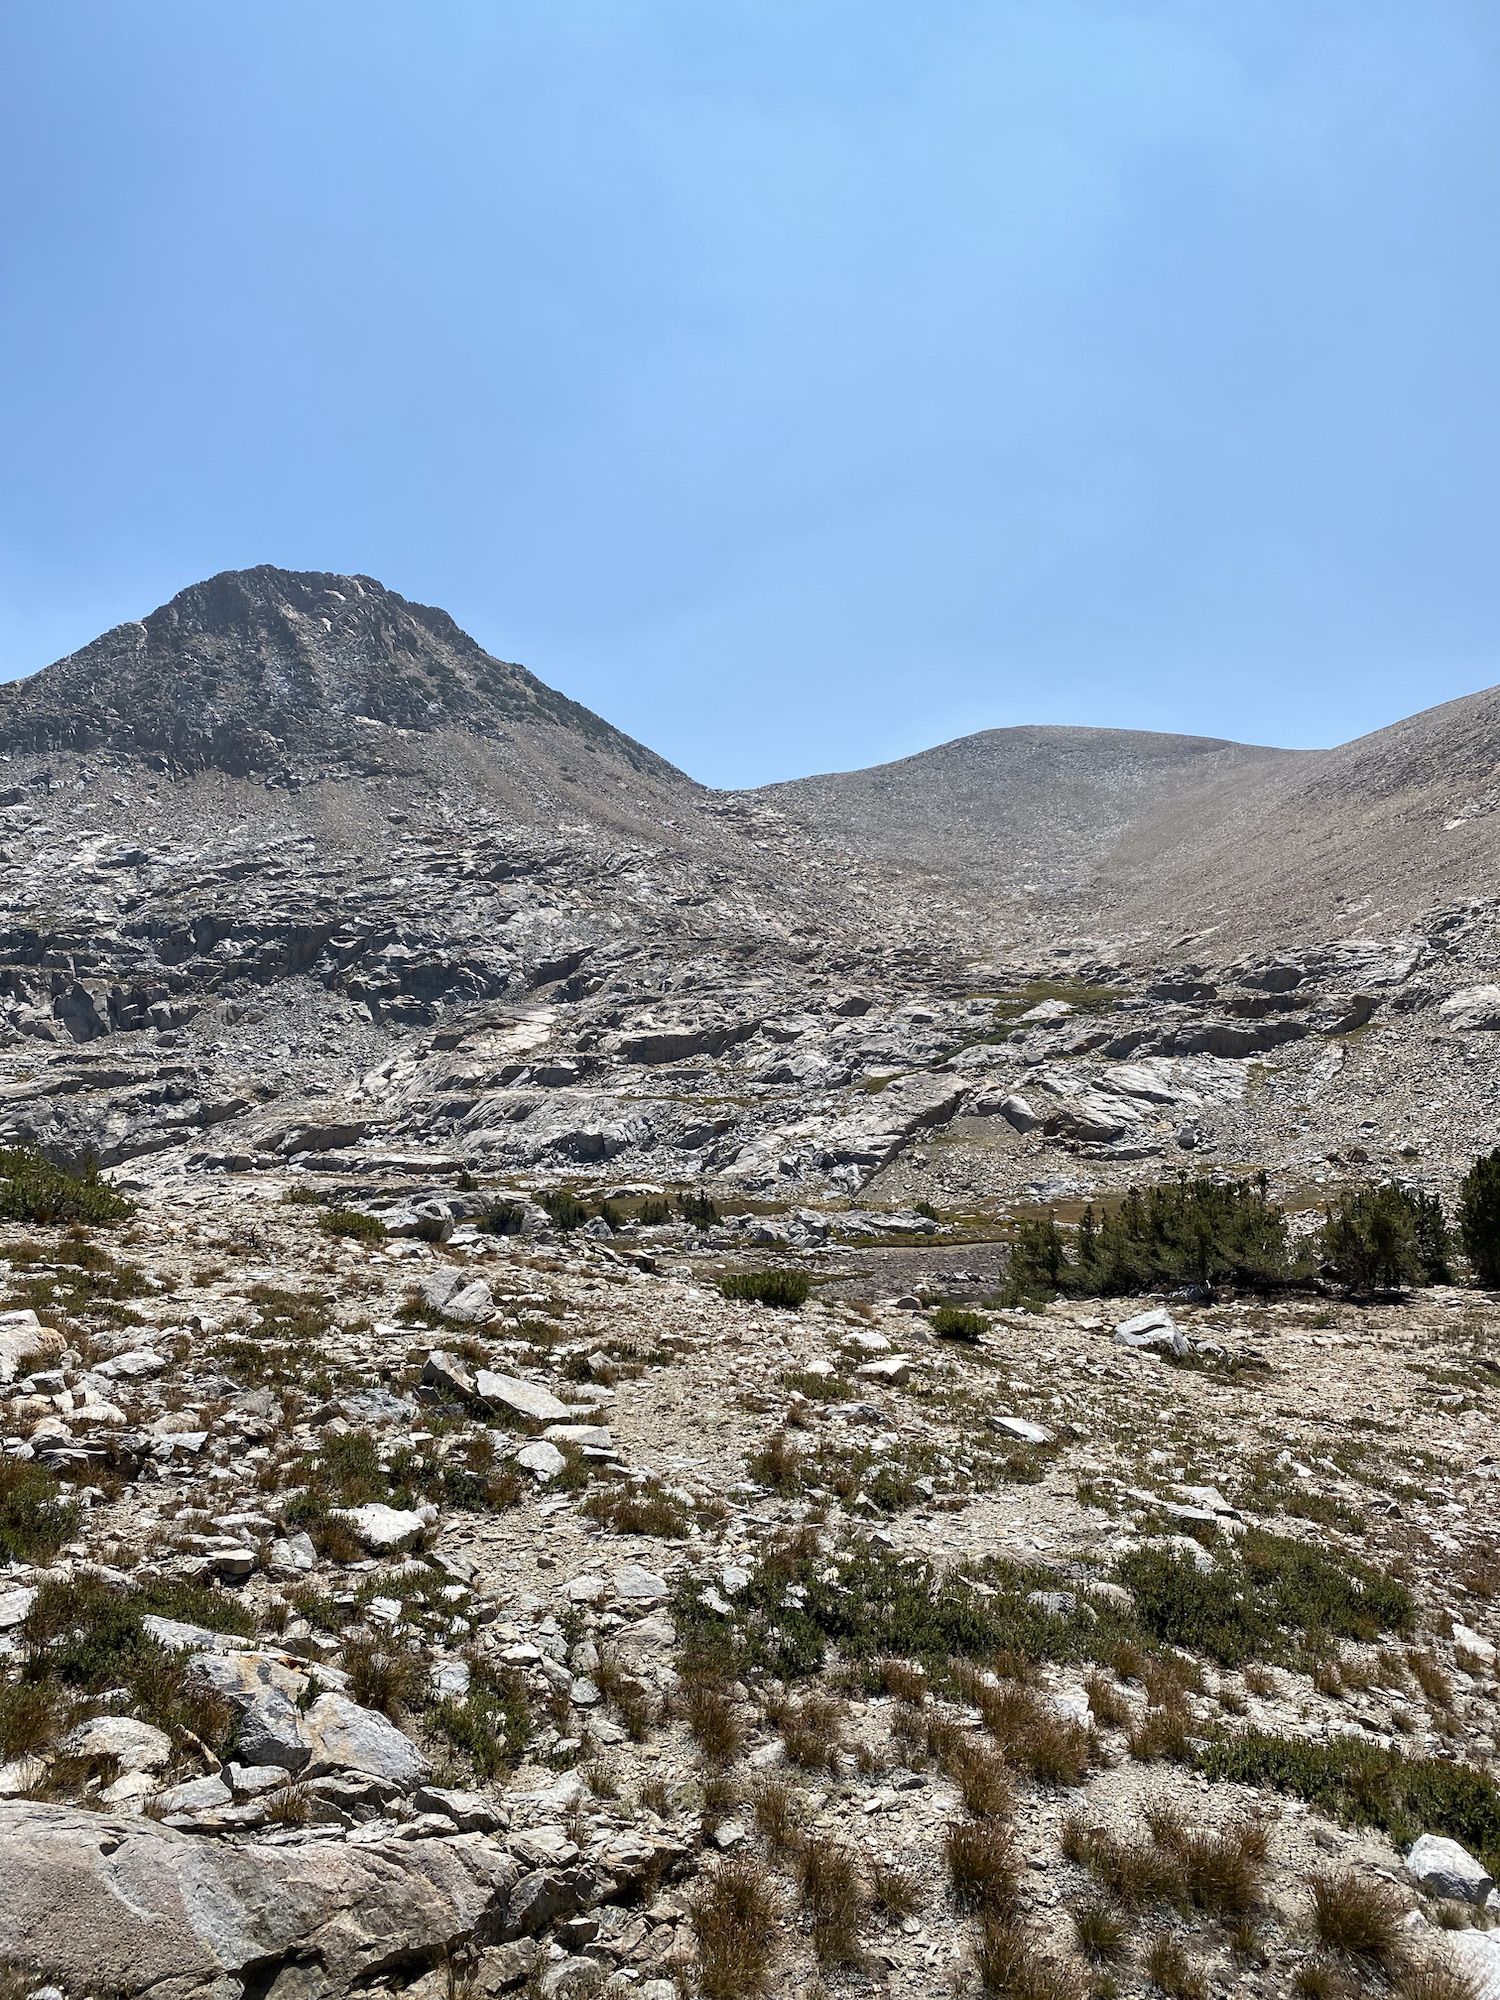 A rocky mountain landscape with almost no vegetation. A mountain pass ahead.